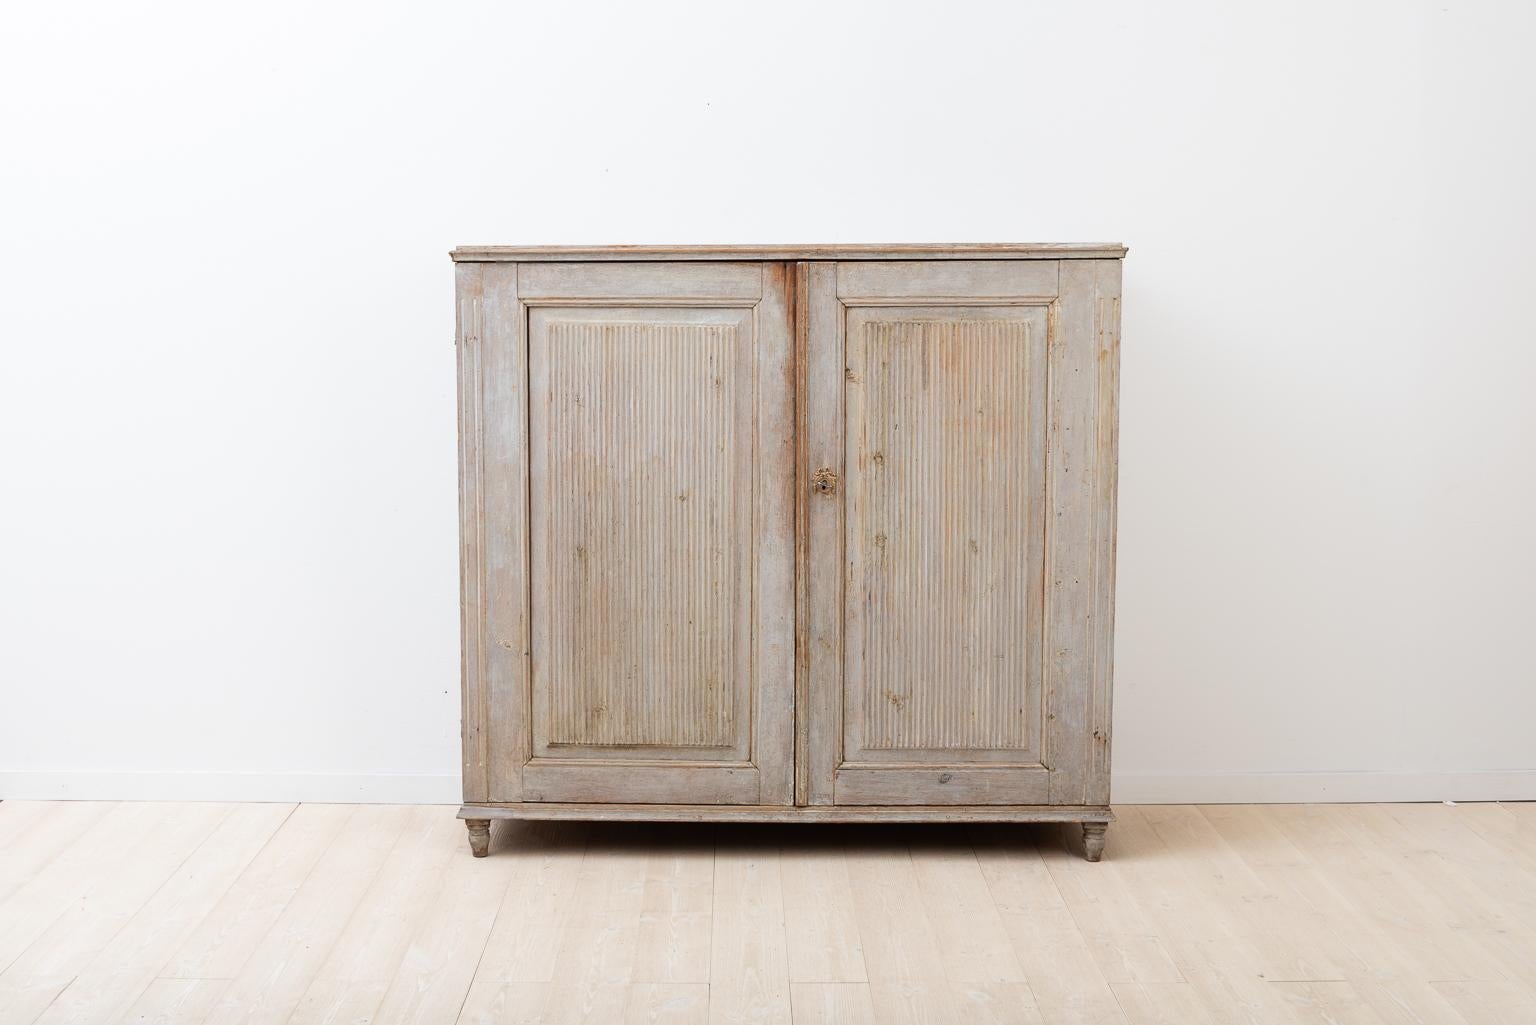 Hand-Painted 18th Century Provincial Swedish Gustavian Sideboard